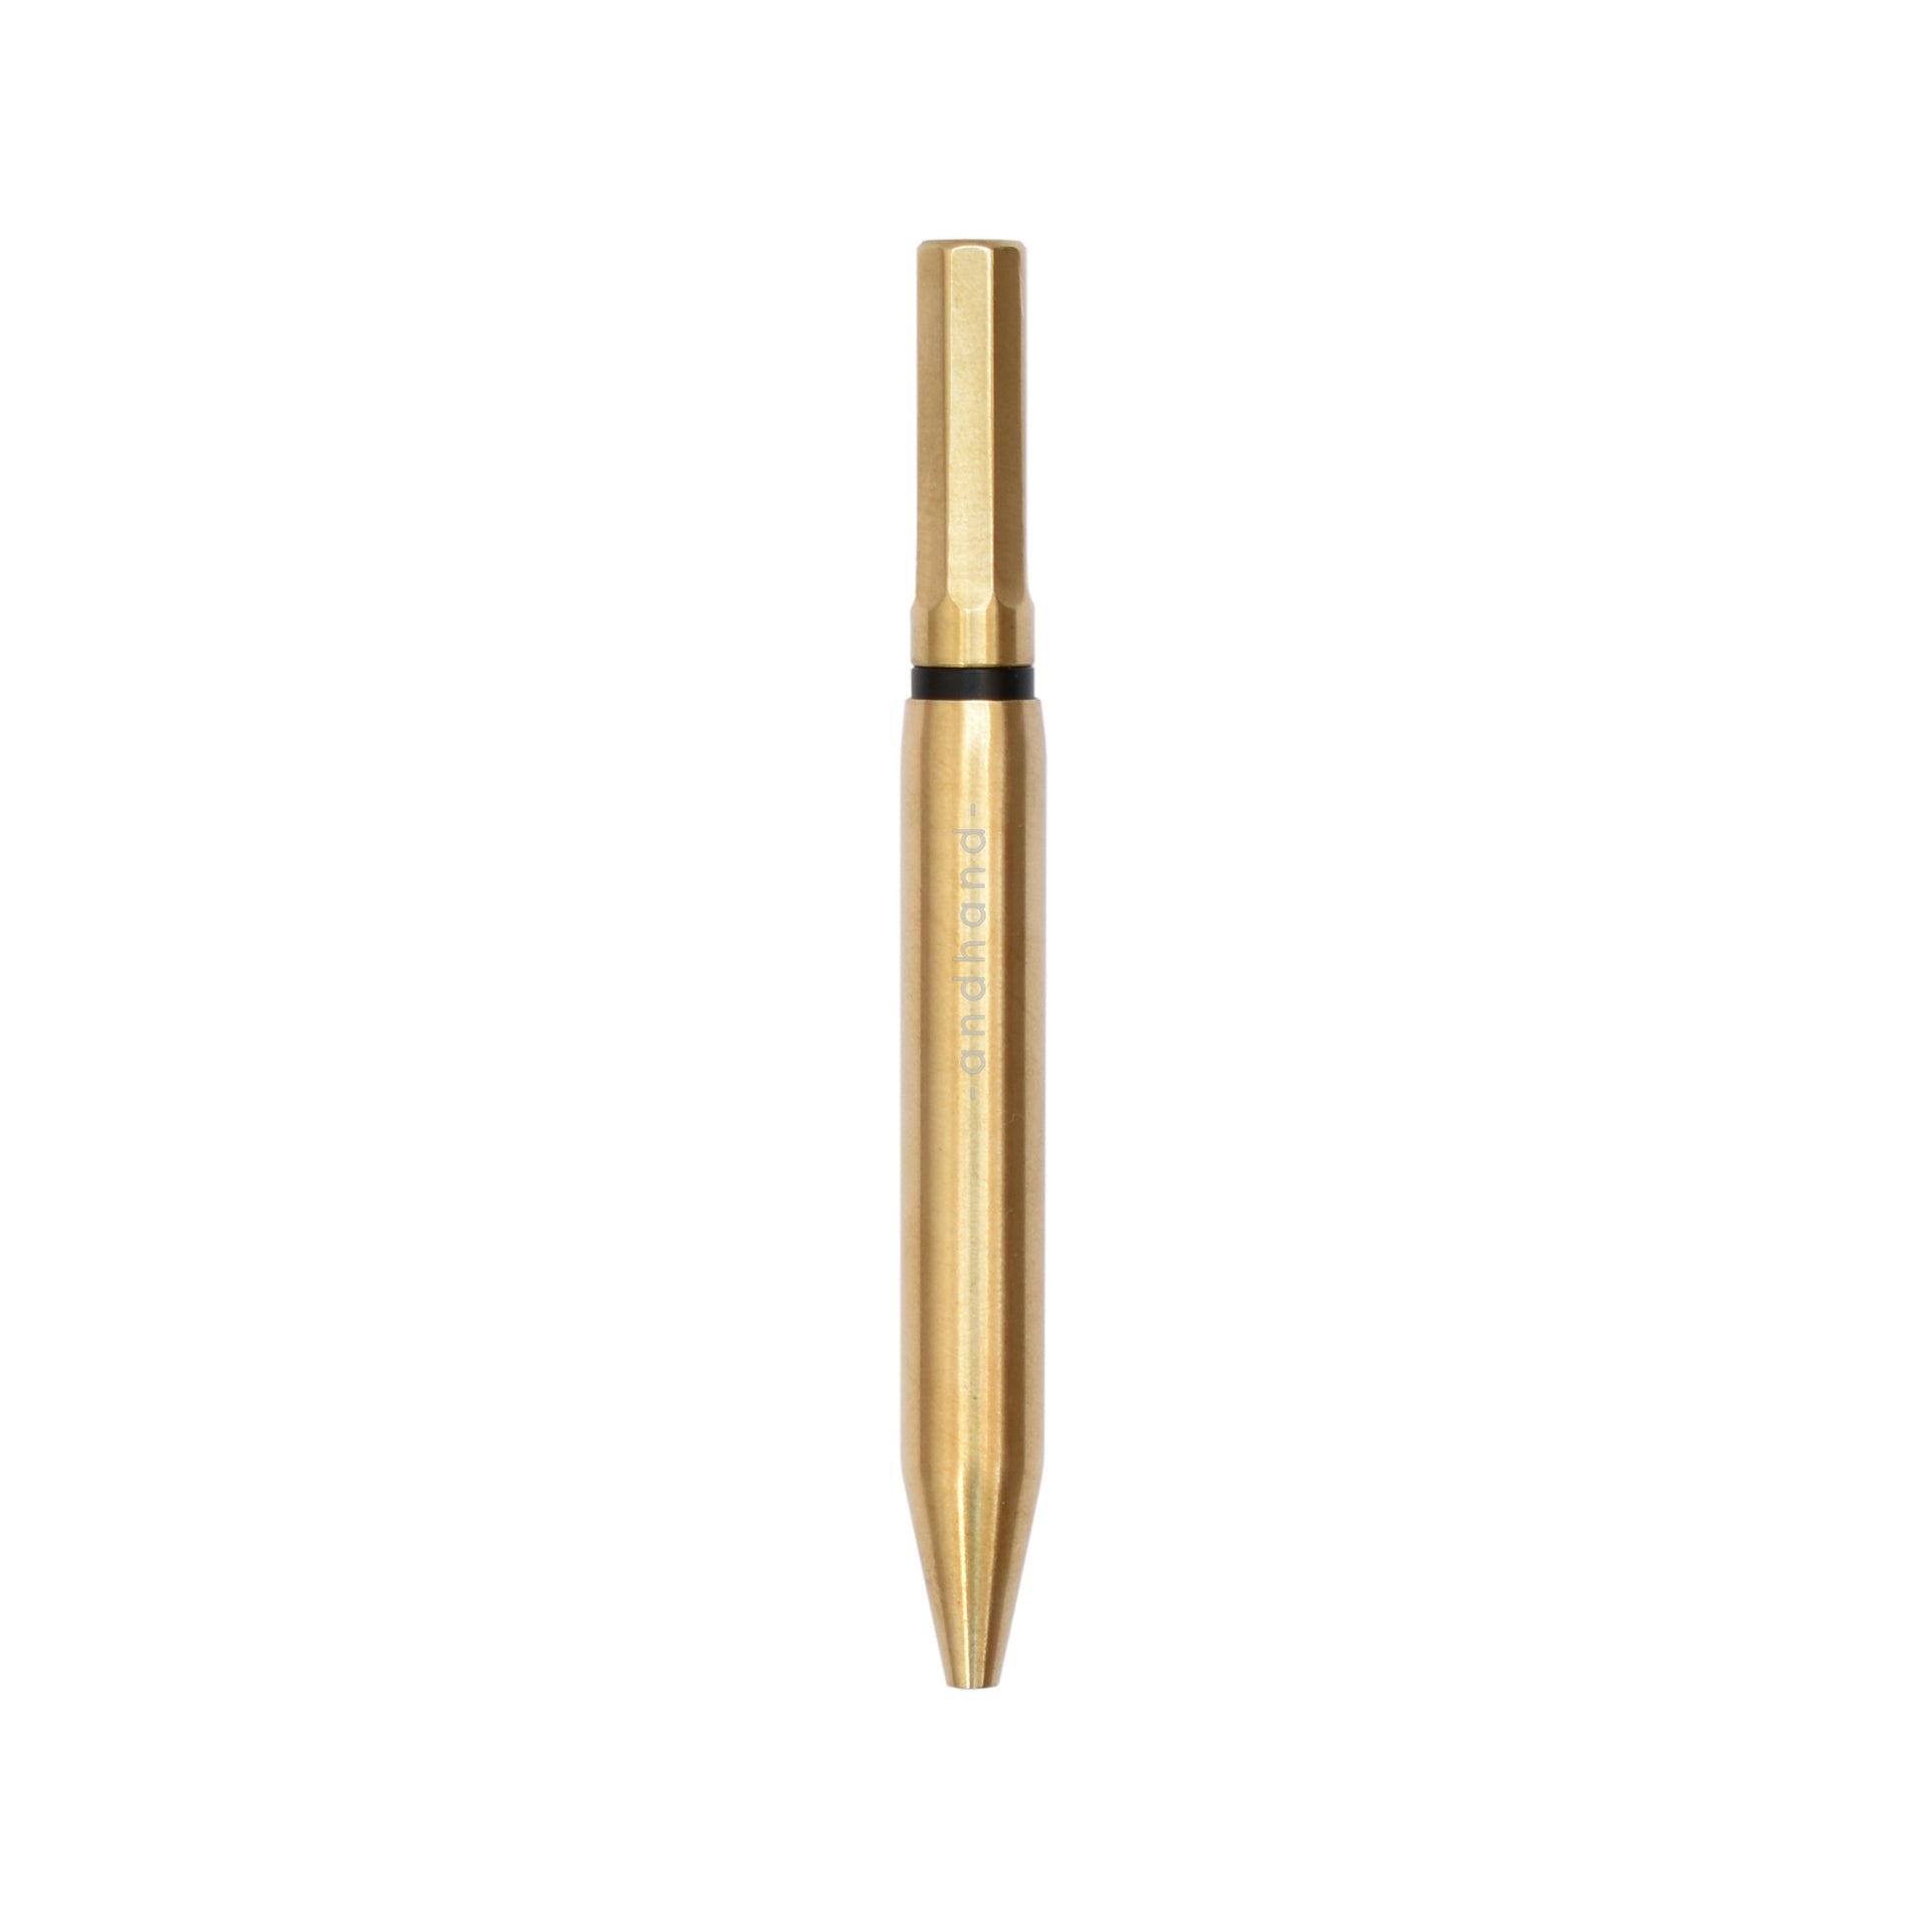 4 inch pen. Method Pen Mini, solid brass mini pen by Andhand. Everyday carry pen.